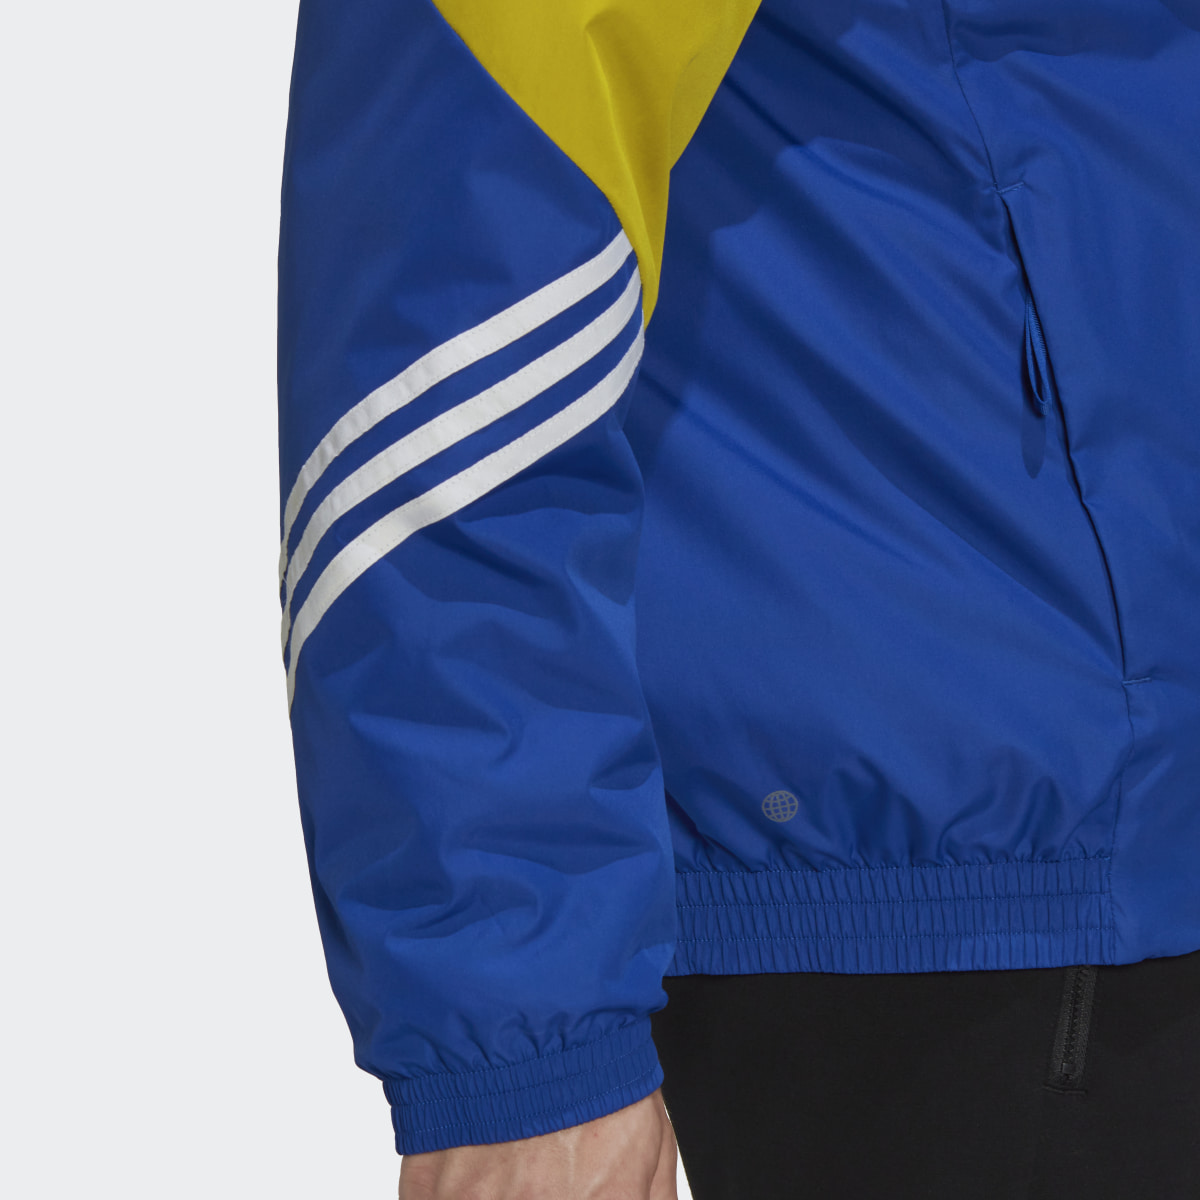 Adidas Back to Sport Hooded Jacket. 9